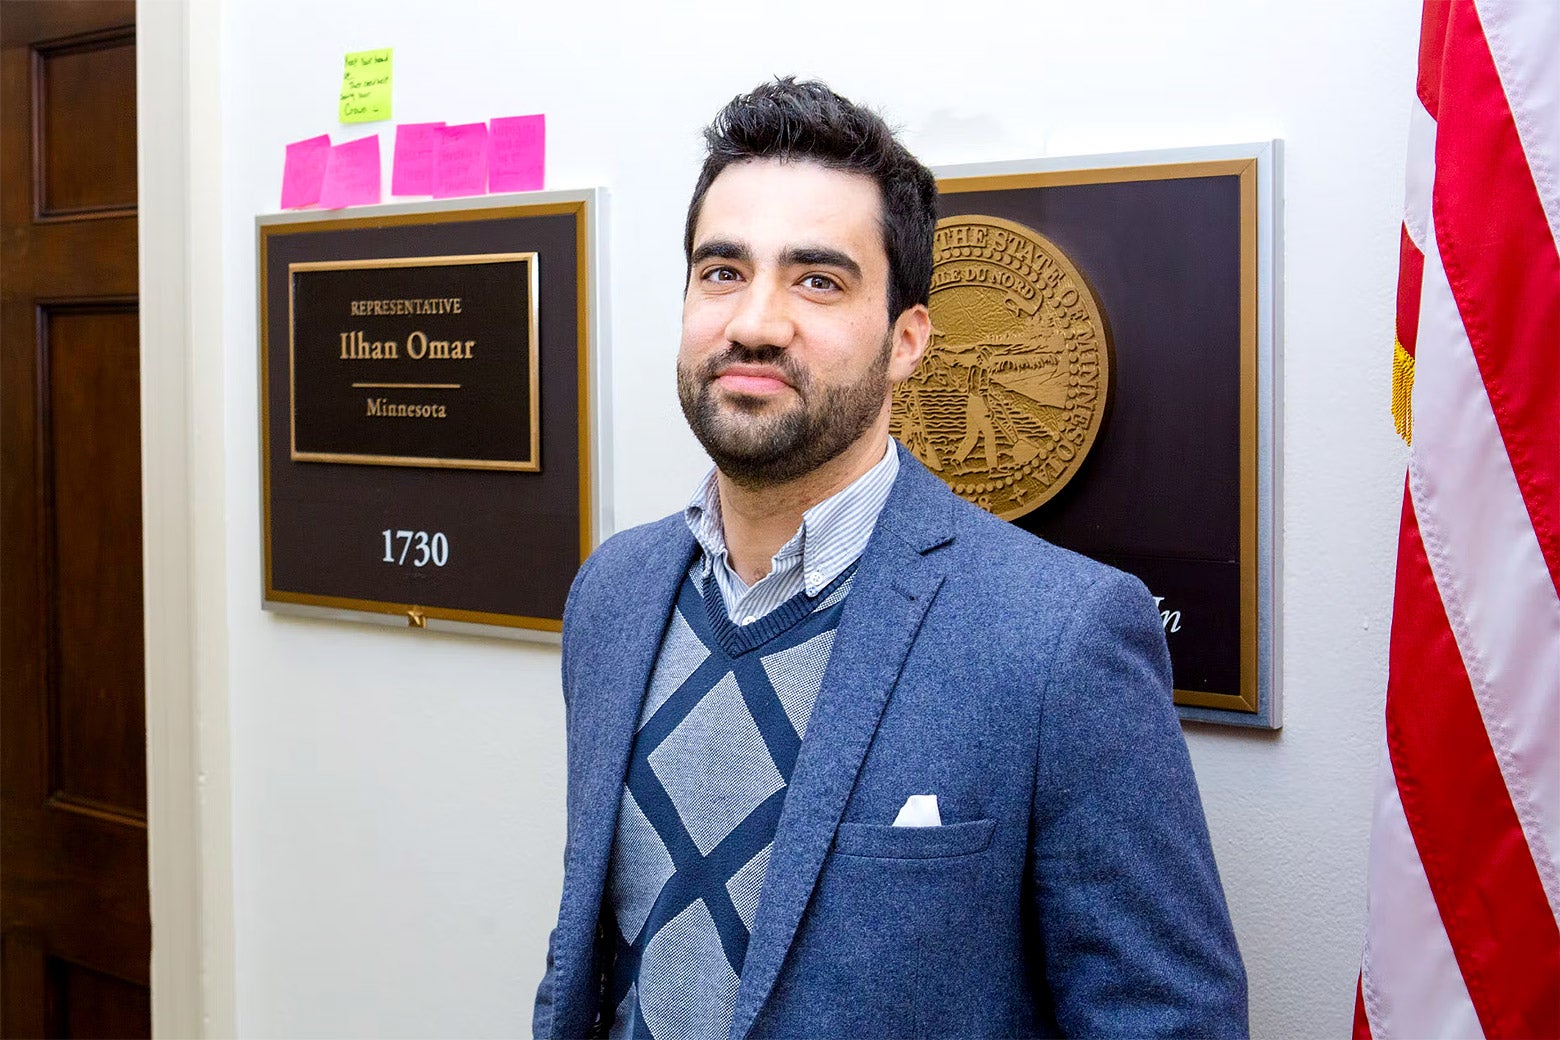 He’s Worked for Ilhan Omar for Years. Then the Right Found Out He Is Jewish.